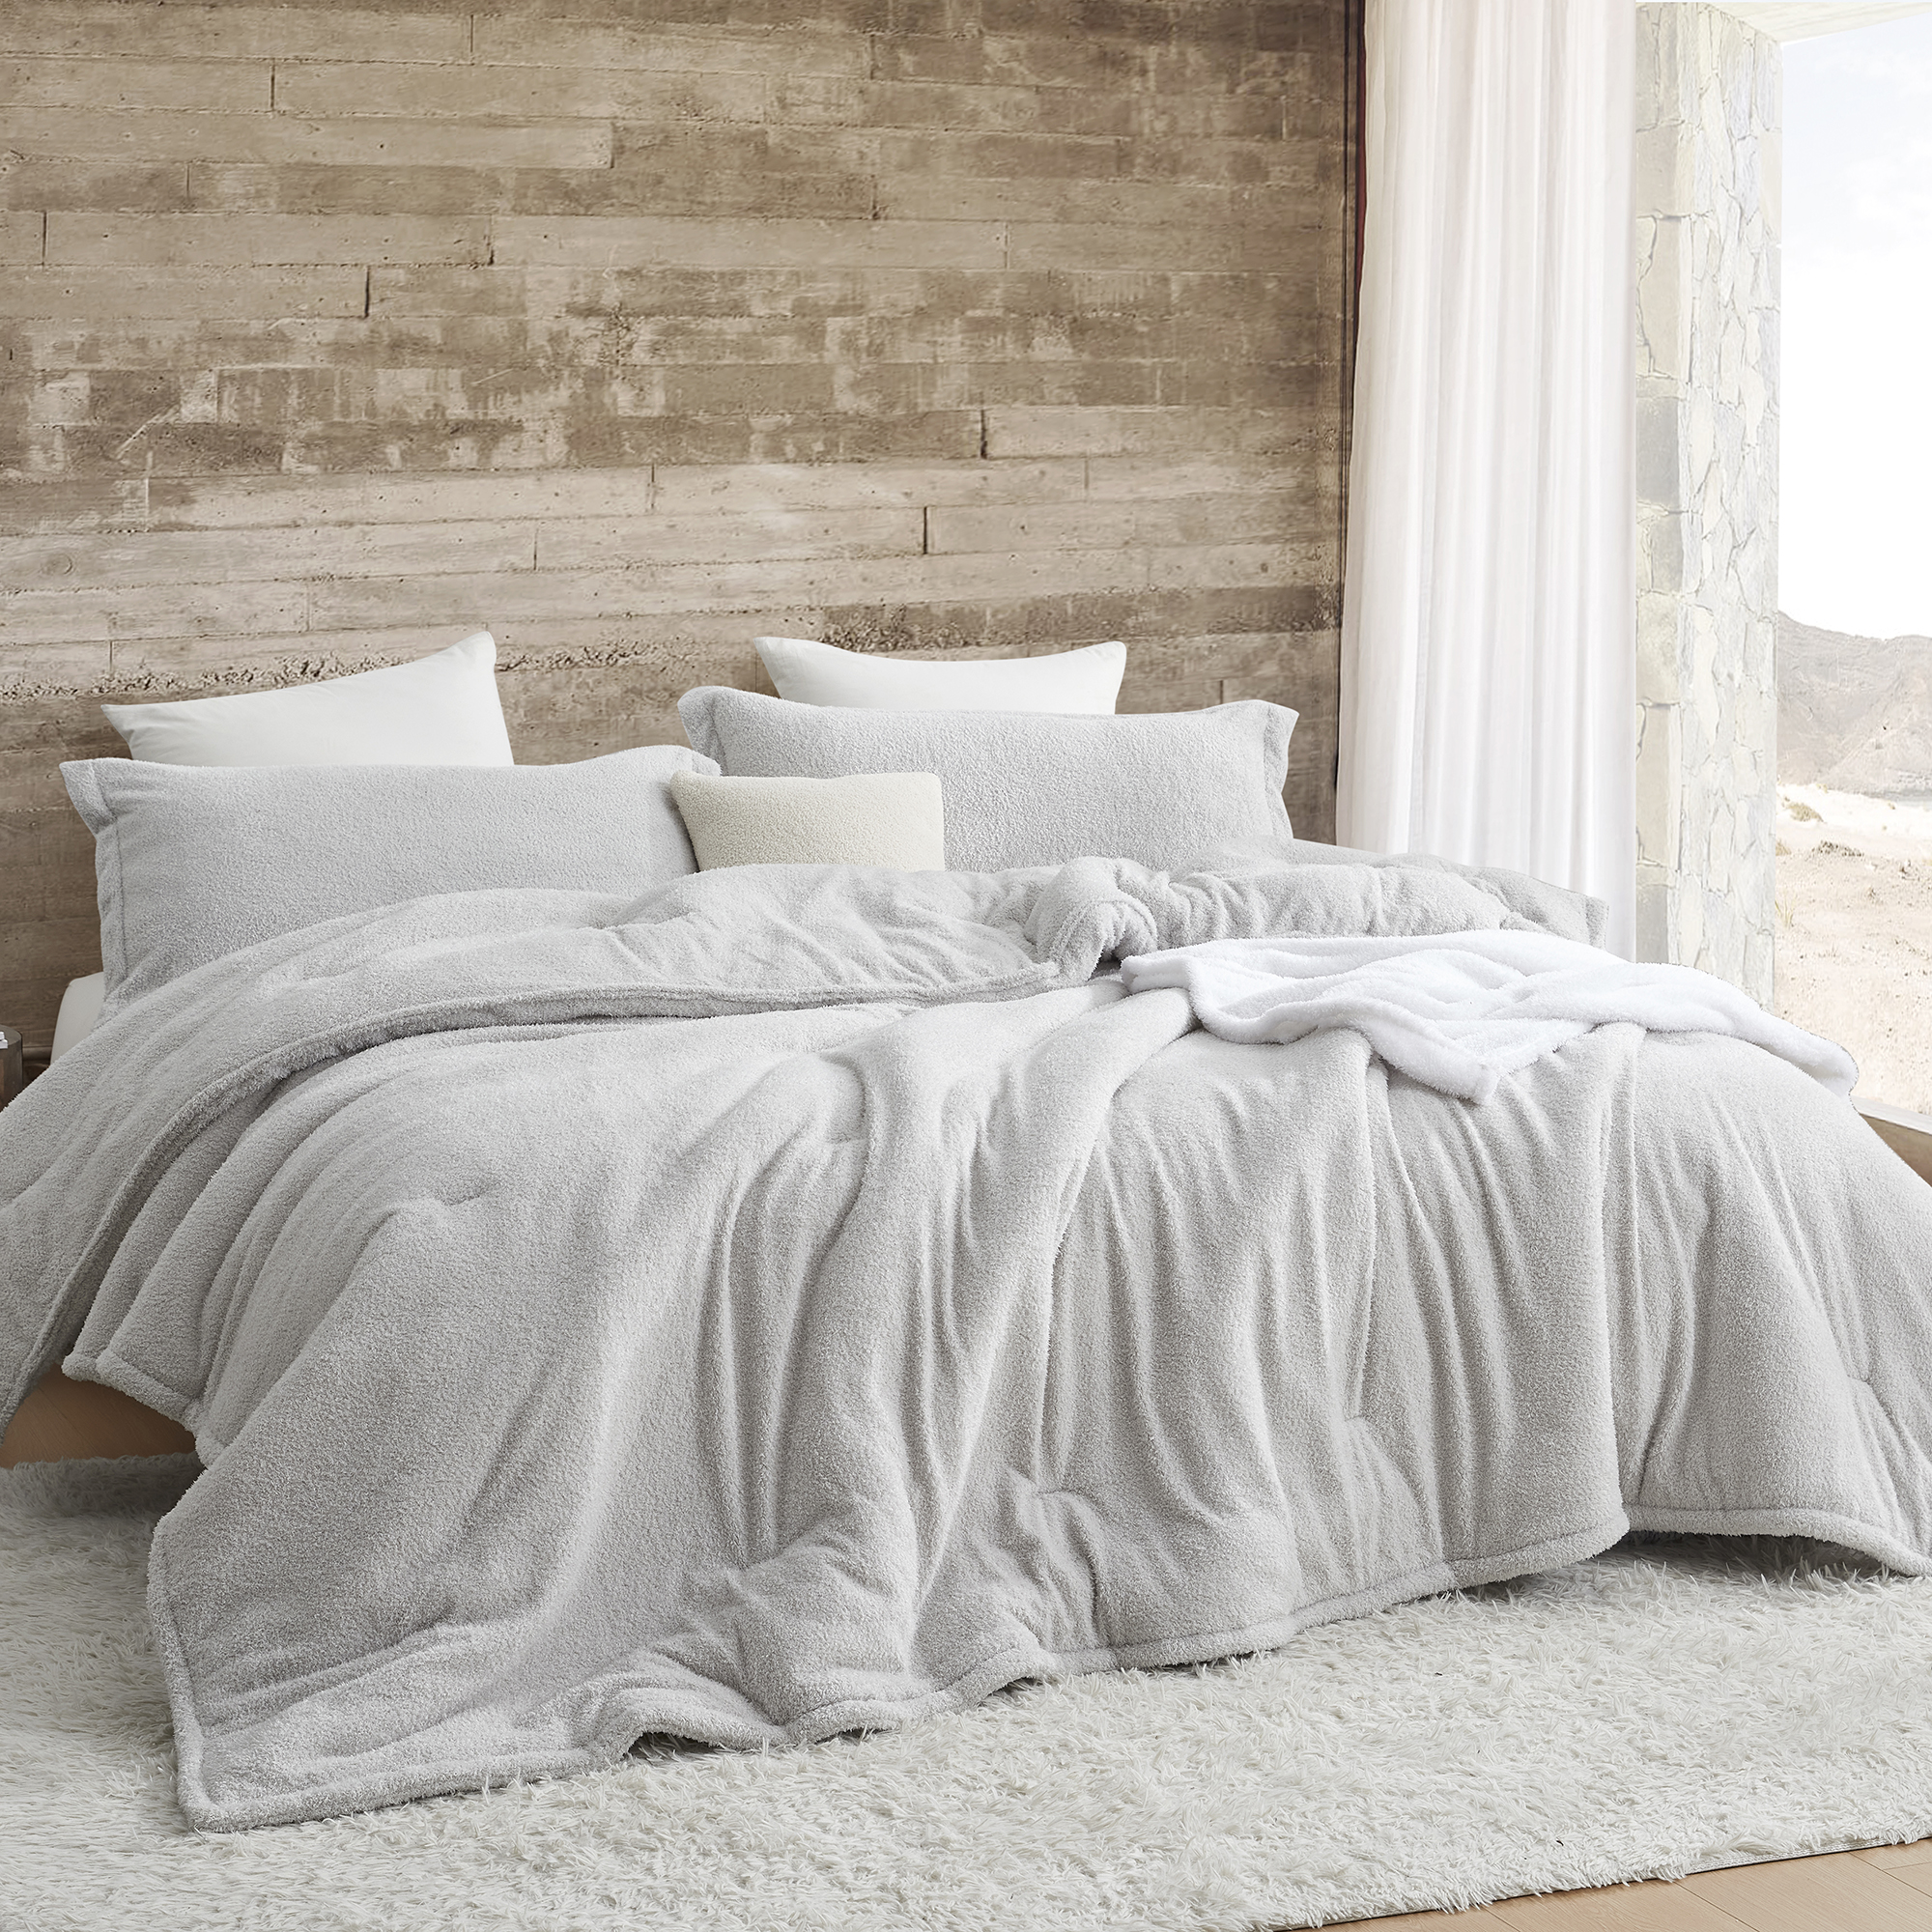 Cozy Moody - Coma Inducer® Oversized Twin Comforter - Light Gray